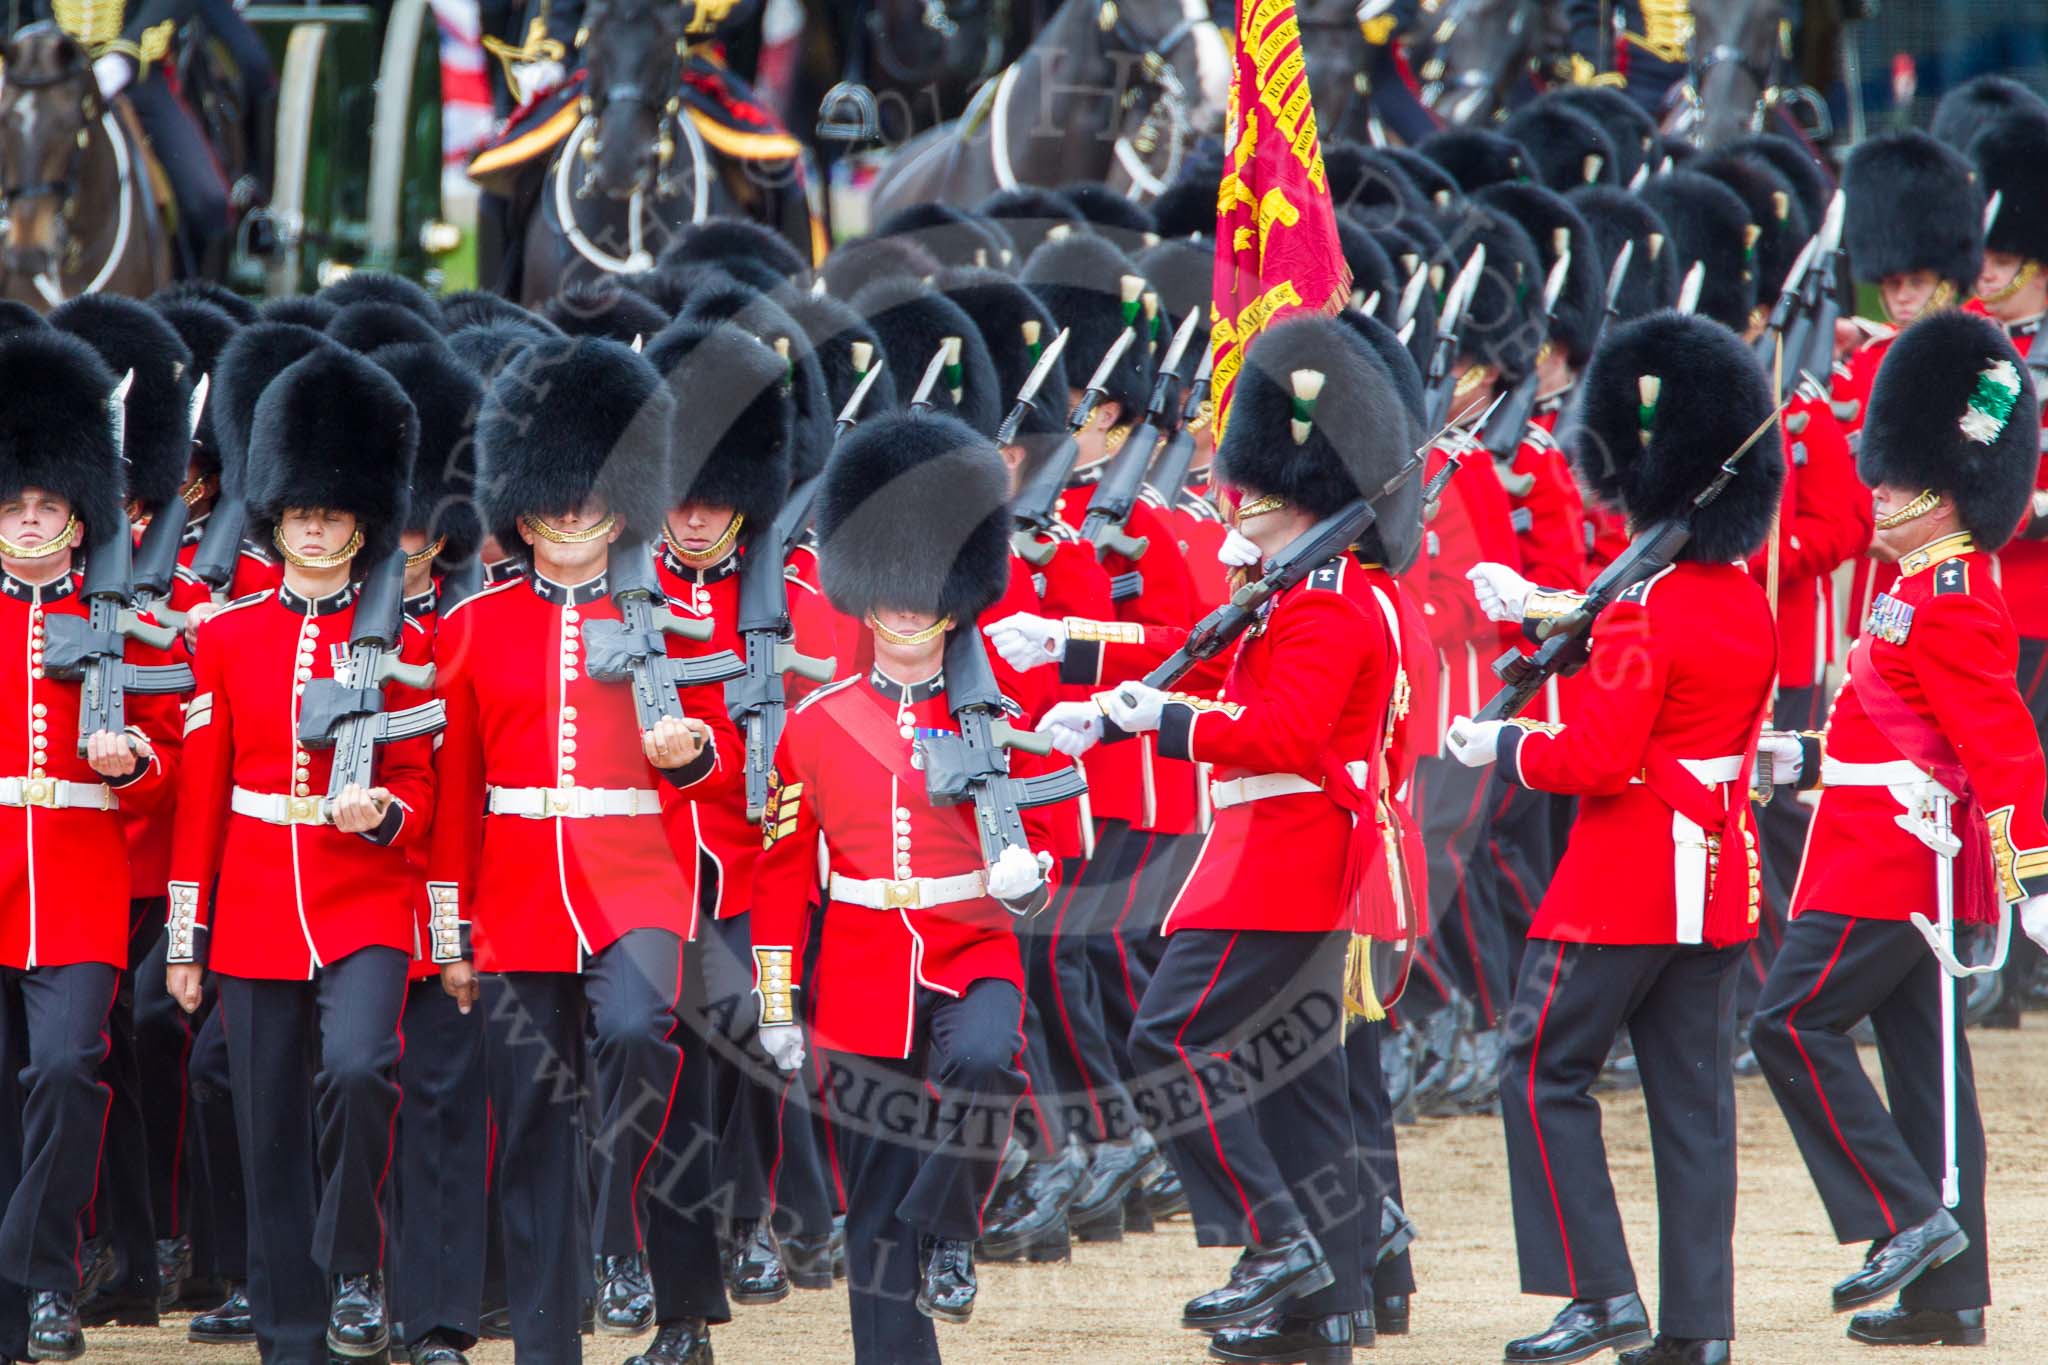 Trooping the Colour 2013: At the end of the March Past in Quick Time, all five guards on the northern side of Horse Guards Parade peform a ninety-degree-turn at the same time. Image #627, 15 June 2013 11:49 Horse Guards Parade, London, UK